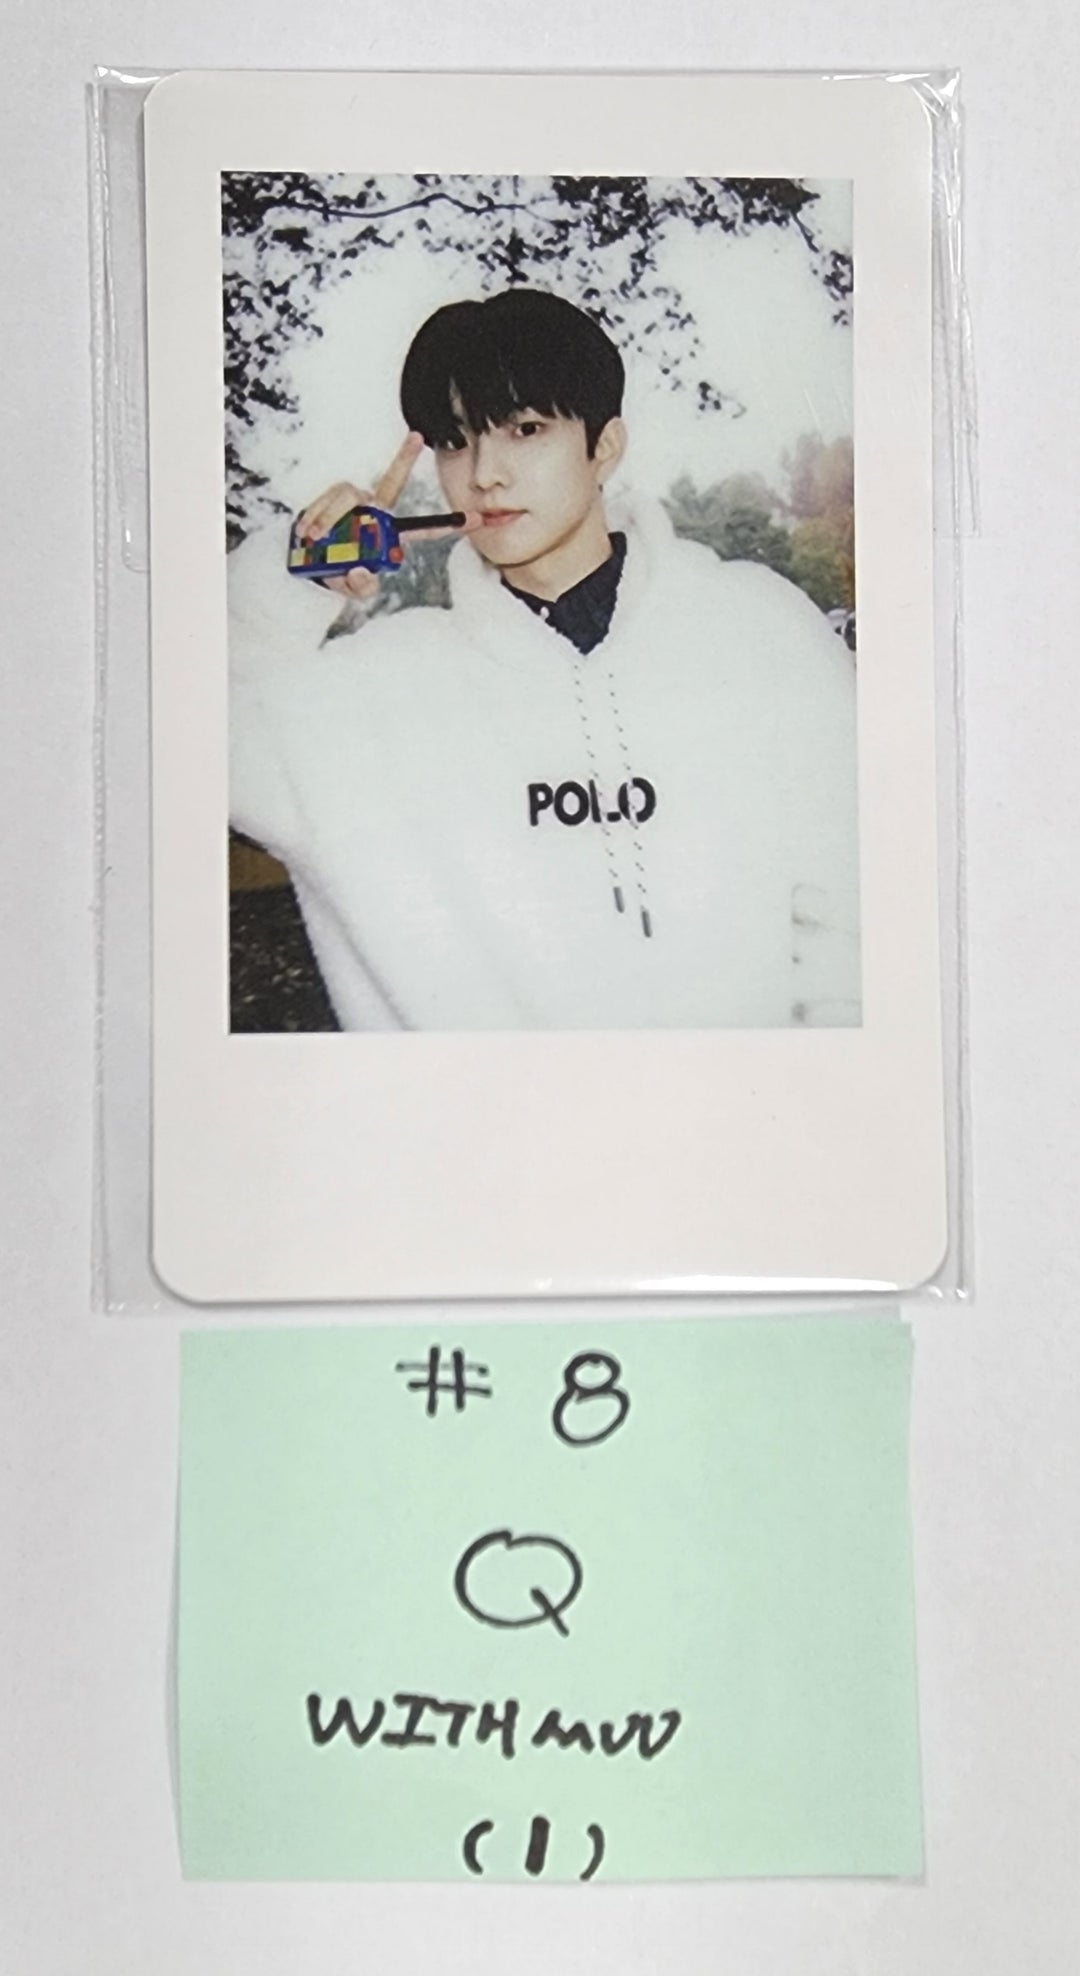 THE BOYZ "FAN CON : THE B-ROAD" - Withmuu MD Event Photocard [Updated 1/3]